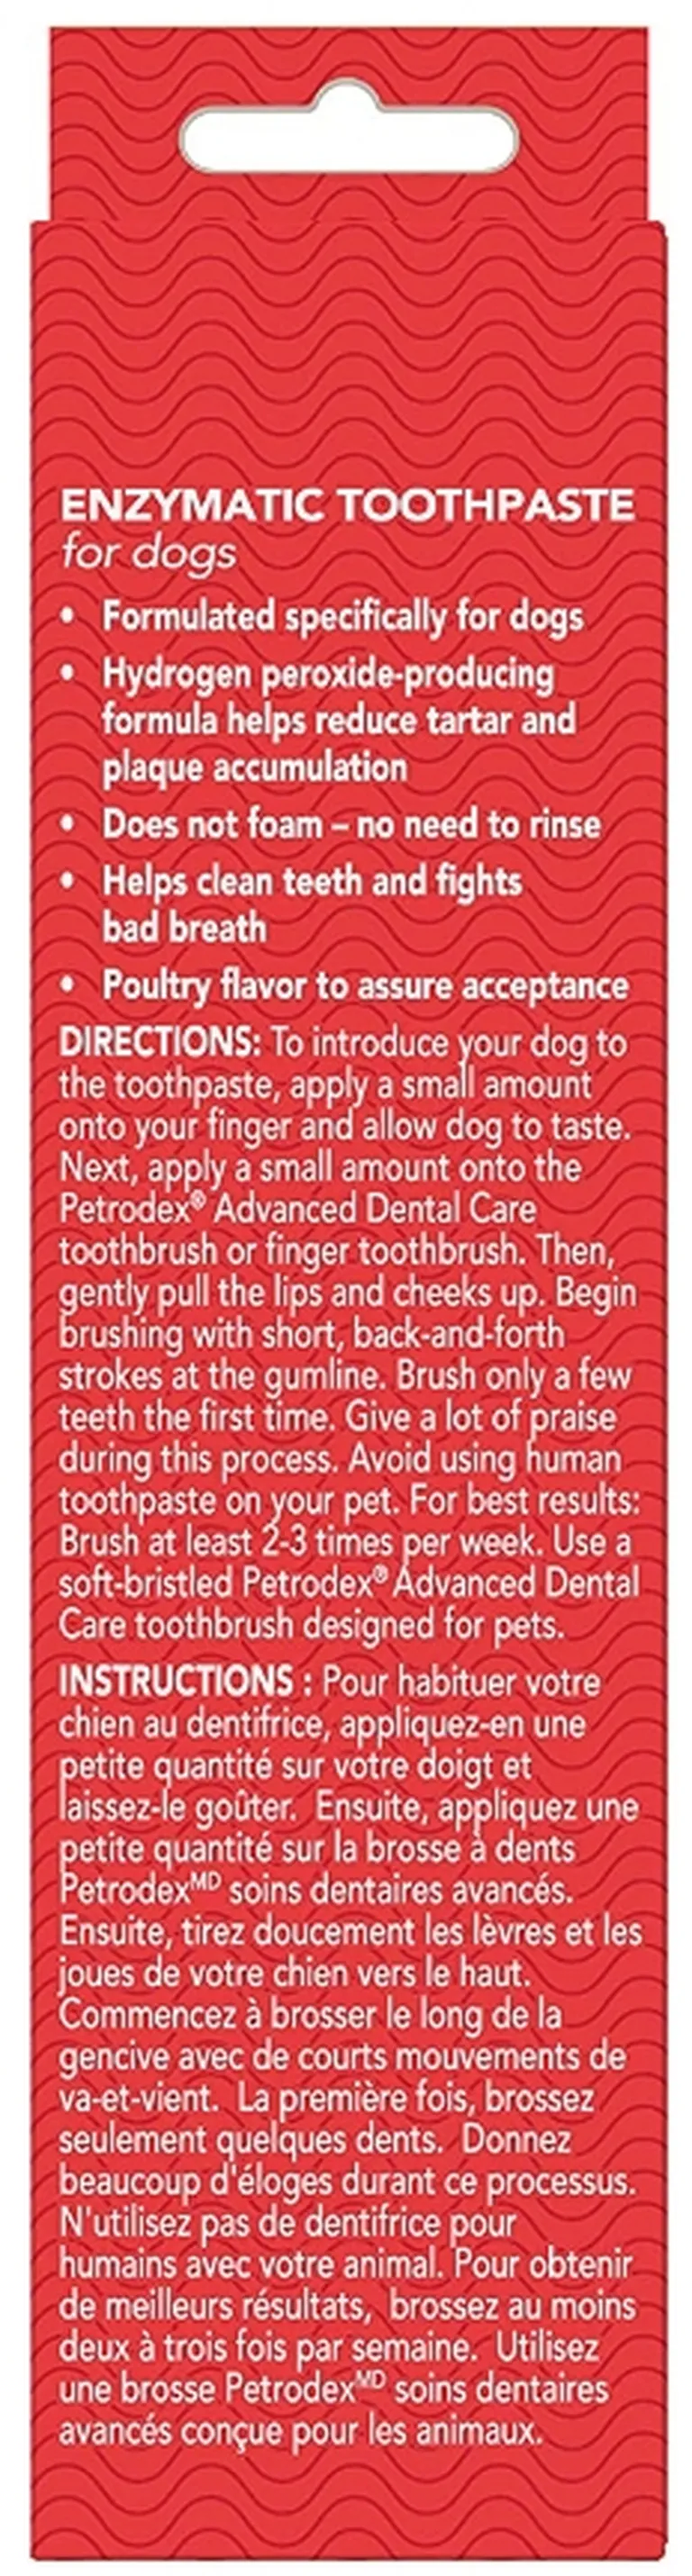 Sentry Petrodex Enzymatic Toothpaste for Dogs Poultry Flavor Photo 3